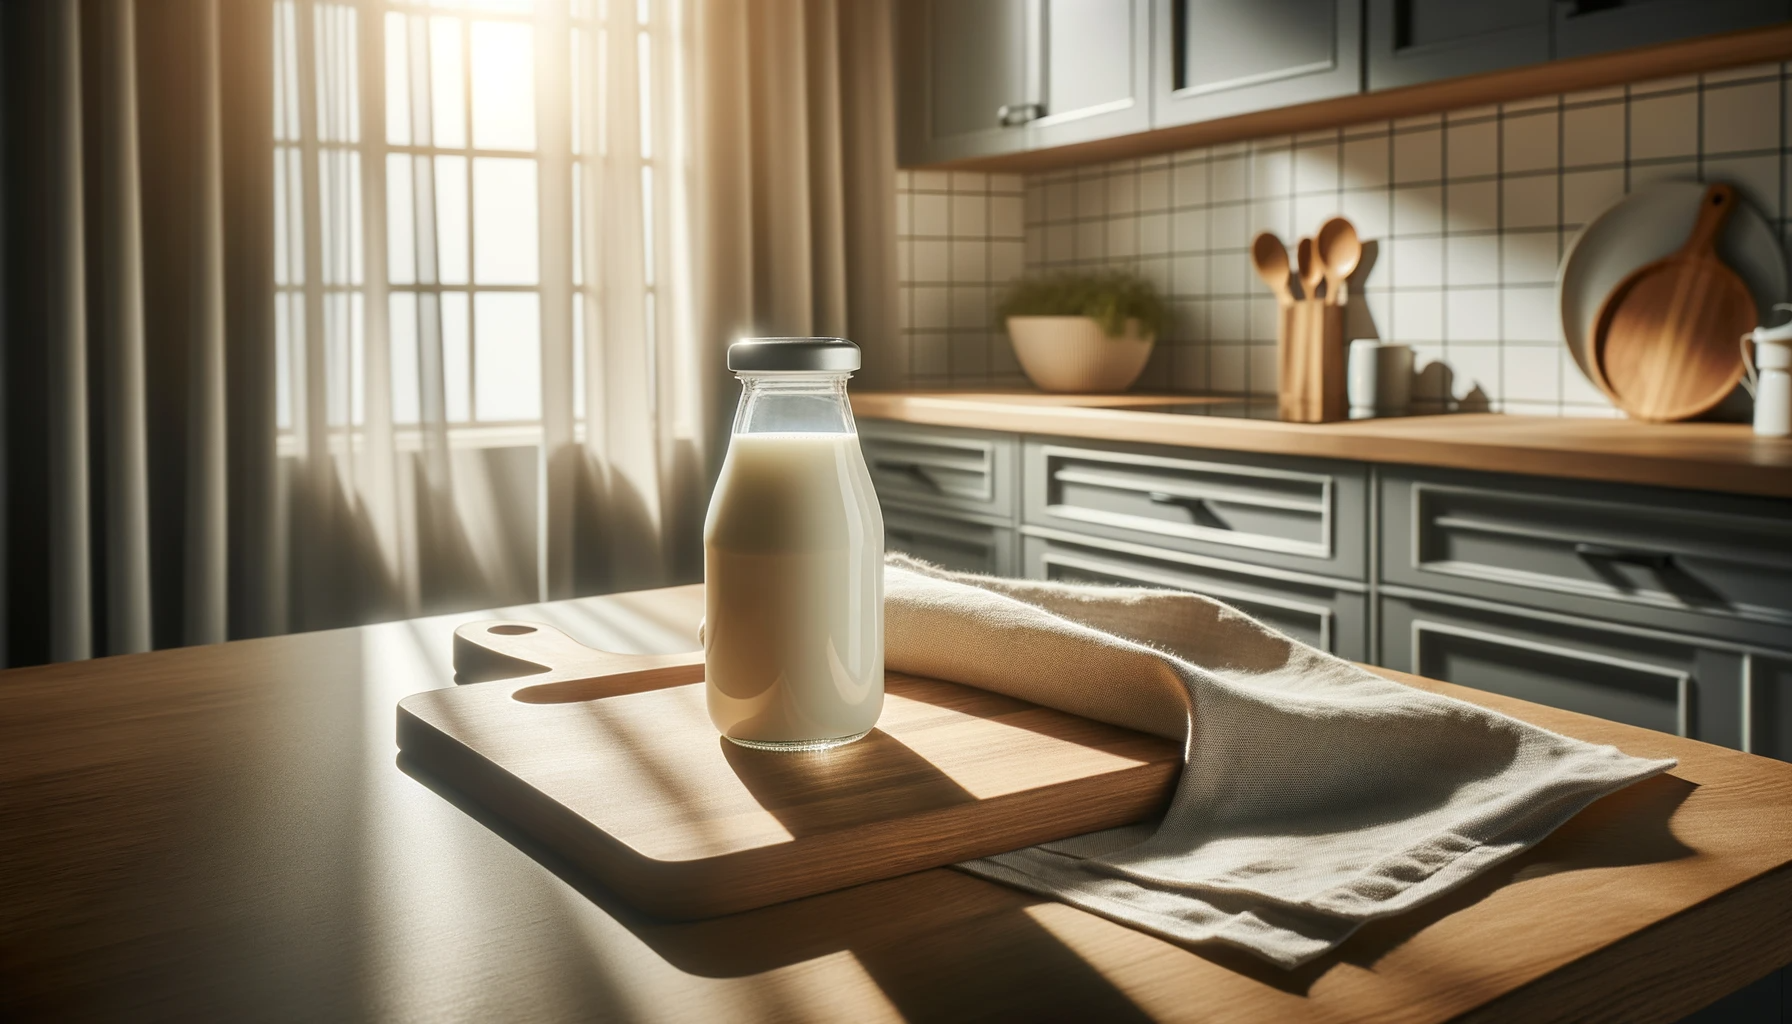 Genuine photo of a sleek, modern kitchen design with sunlight streaming in through sheer curtains. A baby milk bottle, filled with creamy milk, is placed on a wooden cutting board, capturing the viewer's attention.